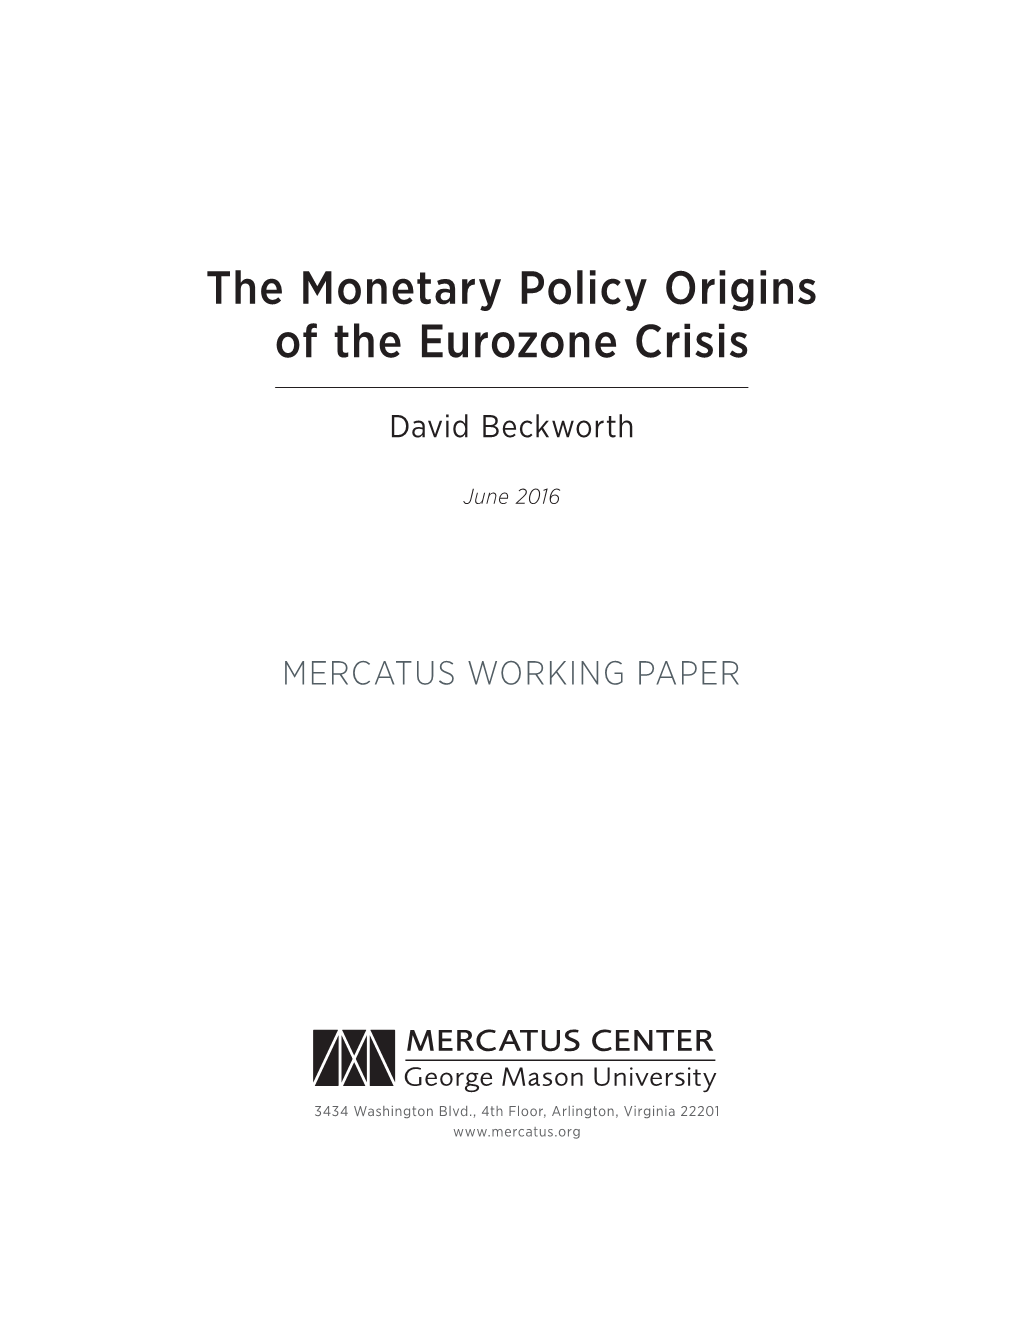 The Monetary Policy Origins of the Eurozone Crisis